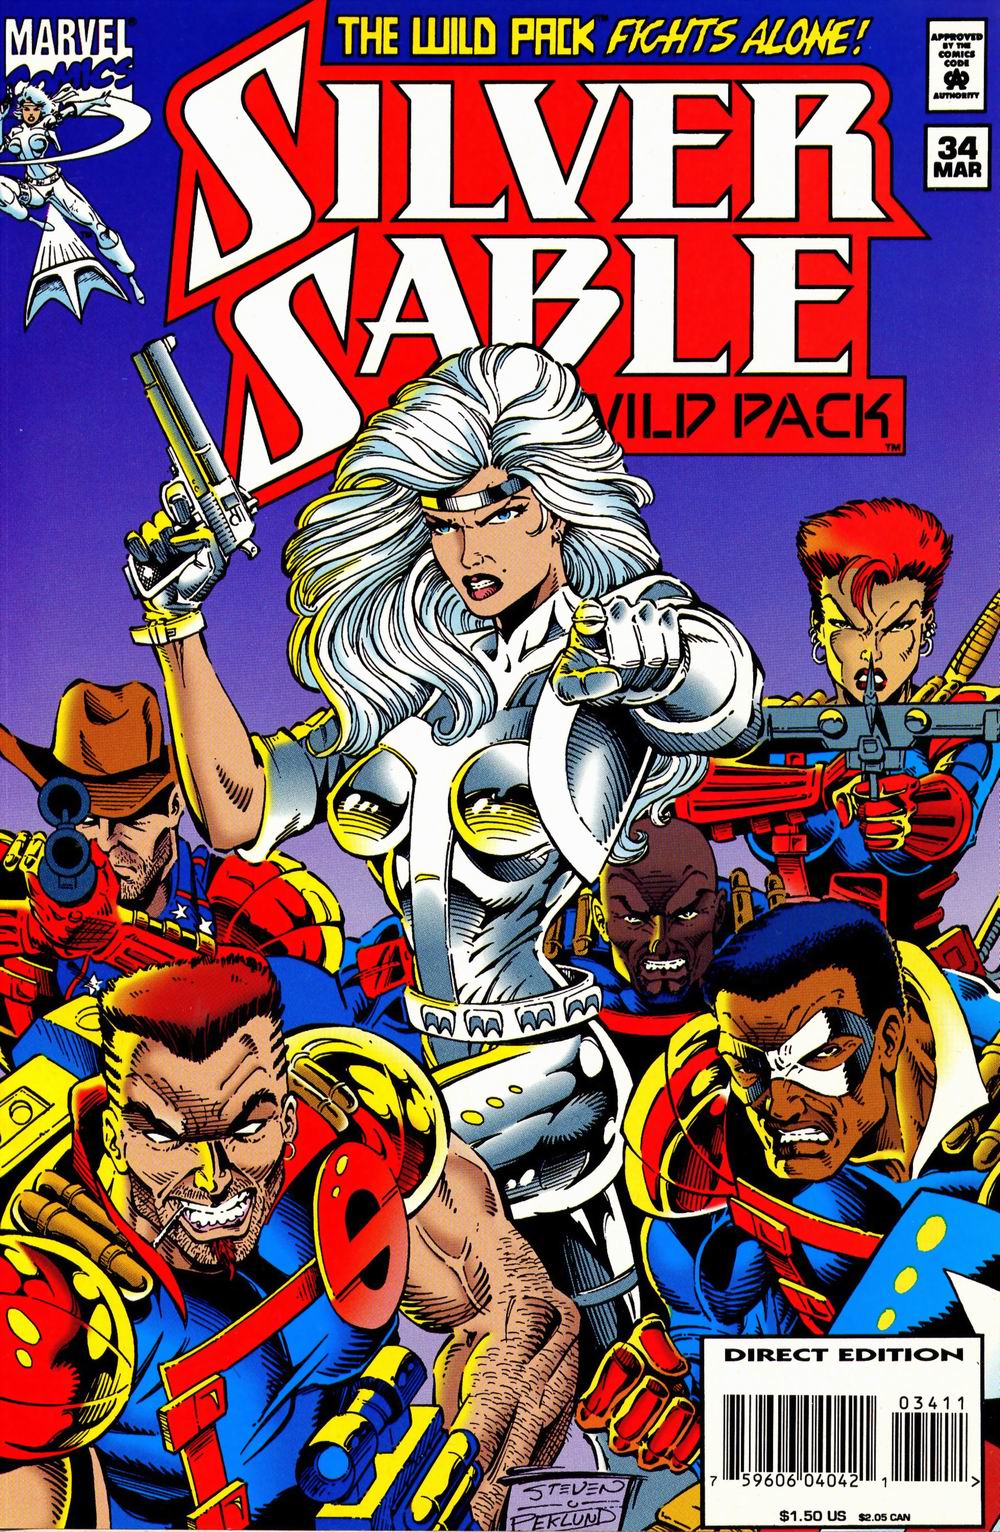 Read online Silver Sable and the Wild Pack comic -  Issue #34 - 1